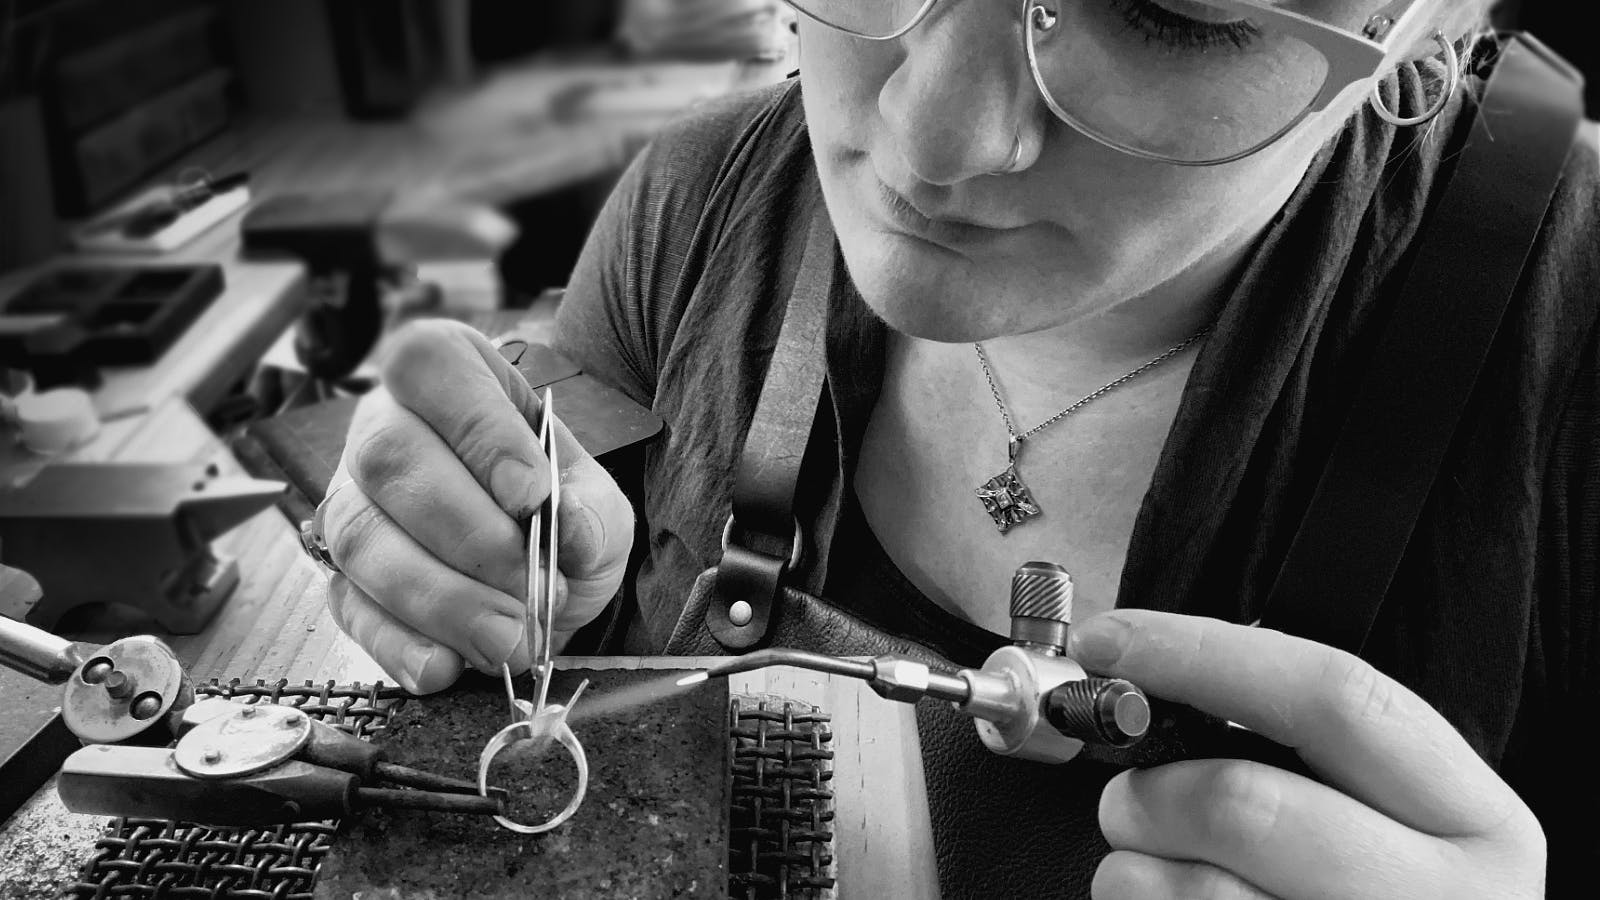 Emily Duggan (Emmire jewellery) crafting one-off jewellery at The Artisan’s Hand